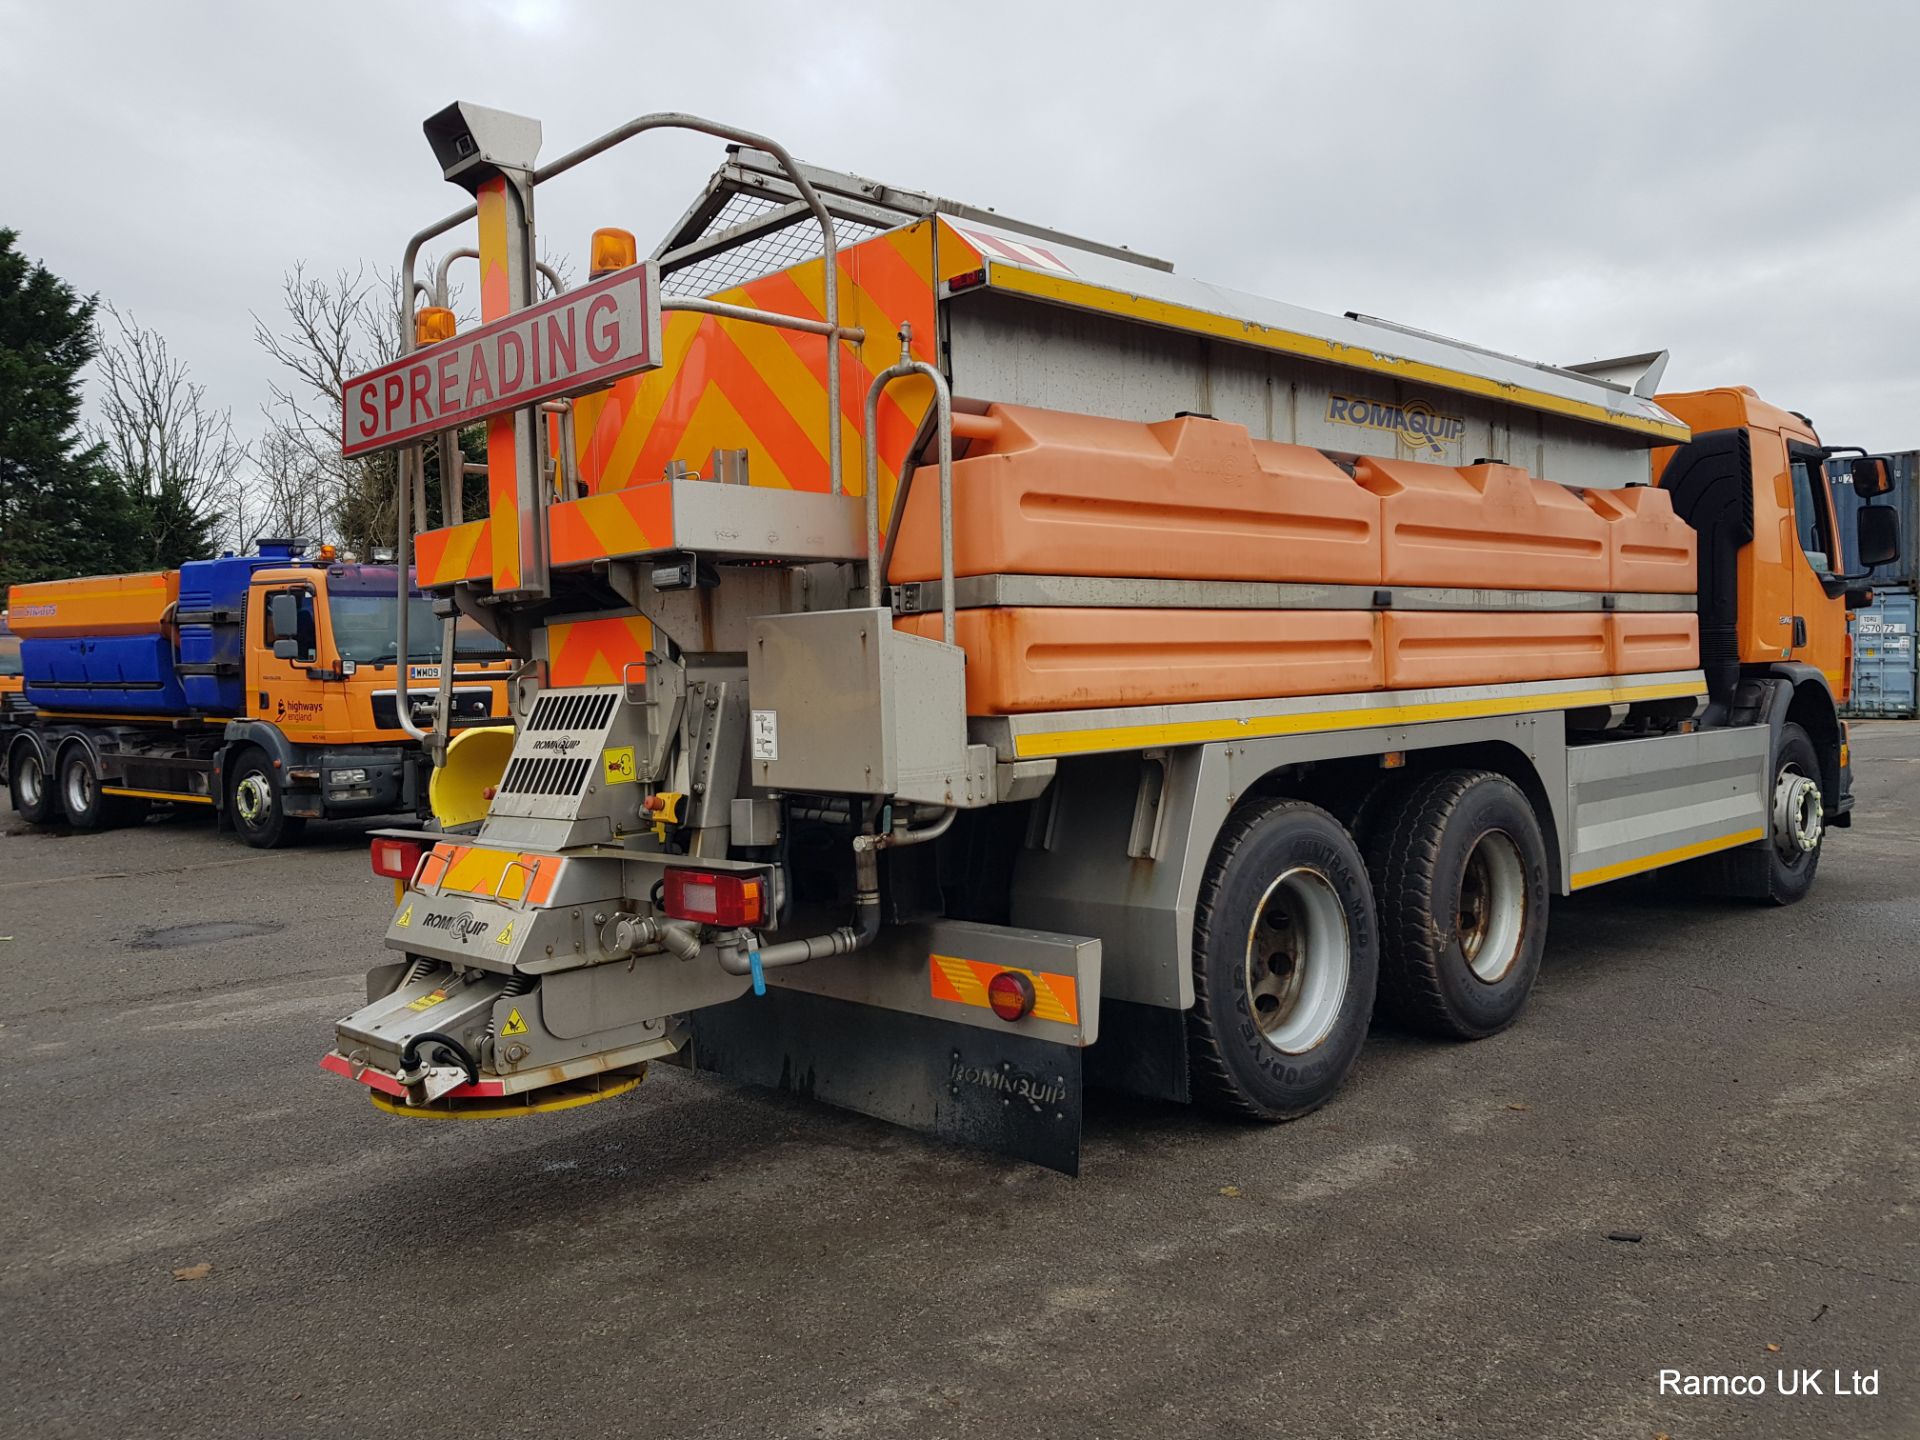 2010 (reg KM10 THG) Volvo FE 340 with Romaquip pre-wet gritter mount. - Image 6 of 17